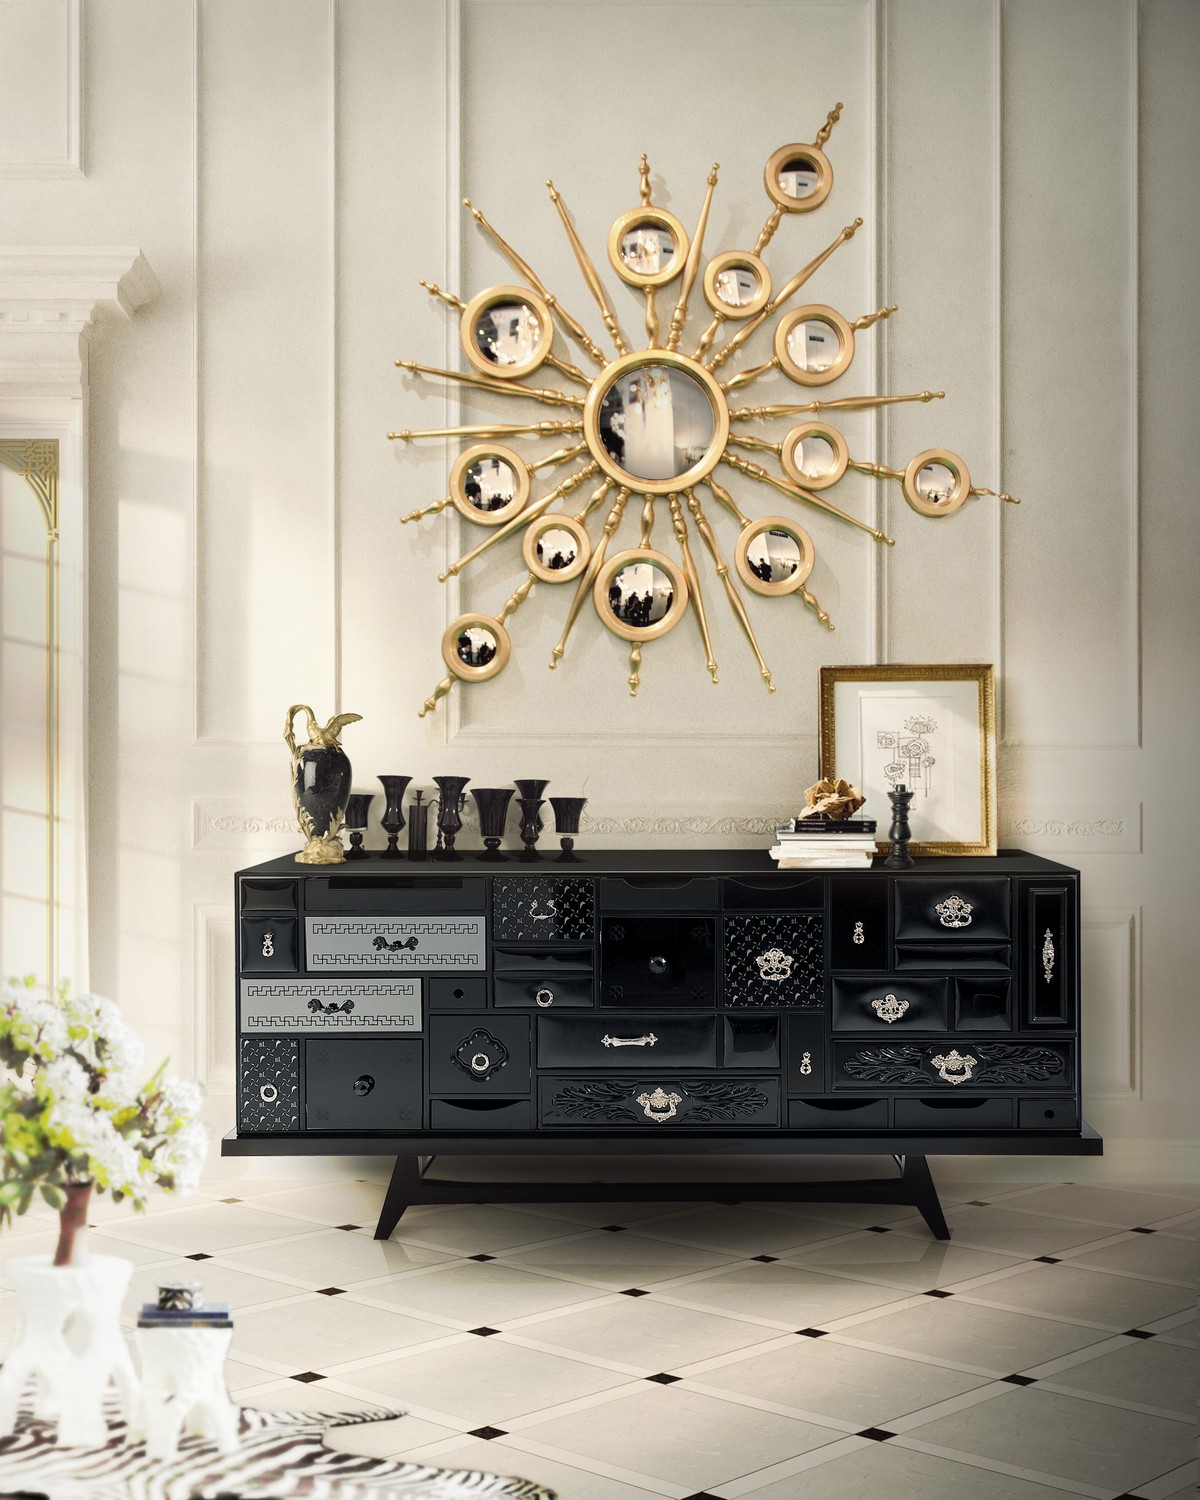 Inspiring Sideboard Ambiances You Will Love (Part IV)